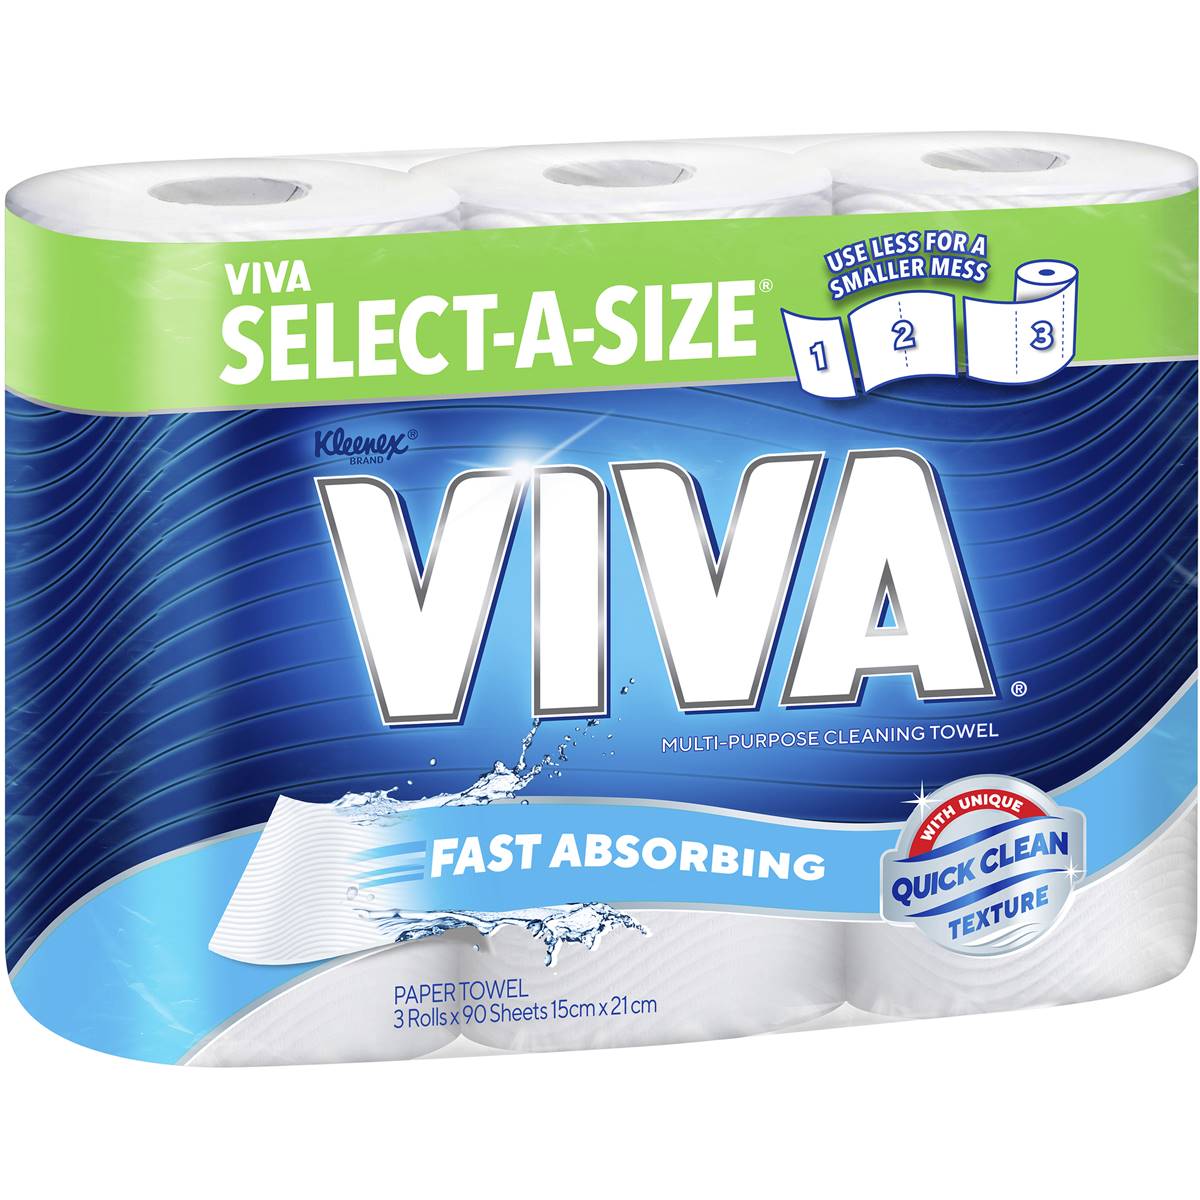 Viva Select-a-size Paper Towels White 270 Sheets 3 Pack